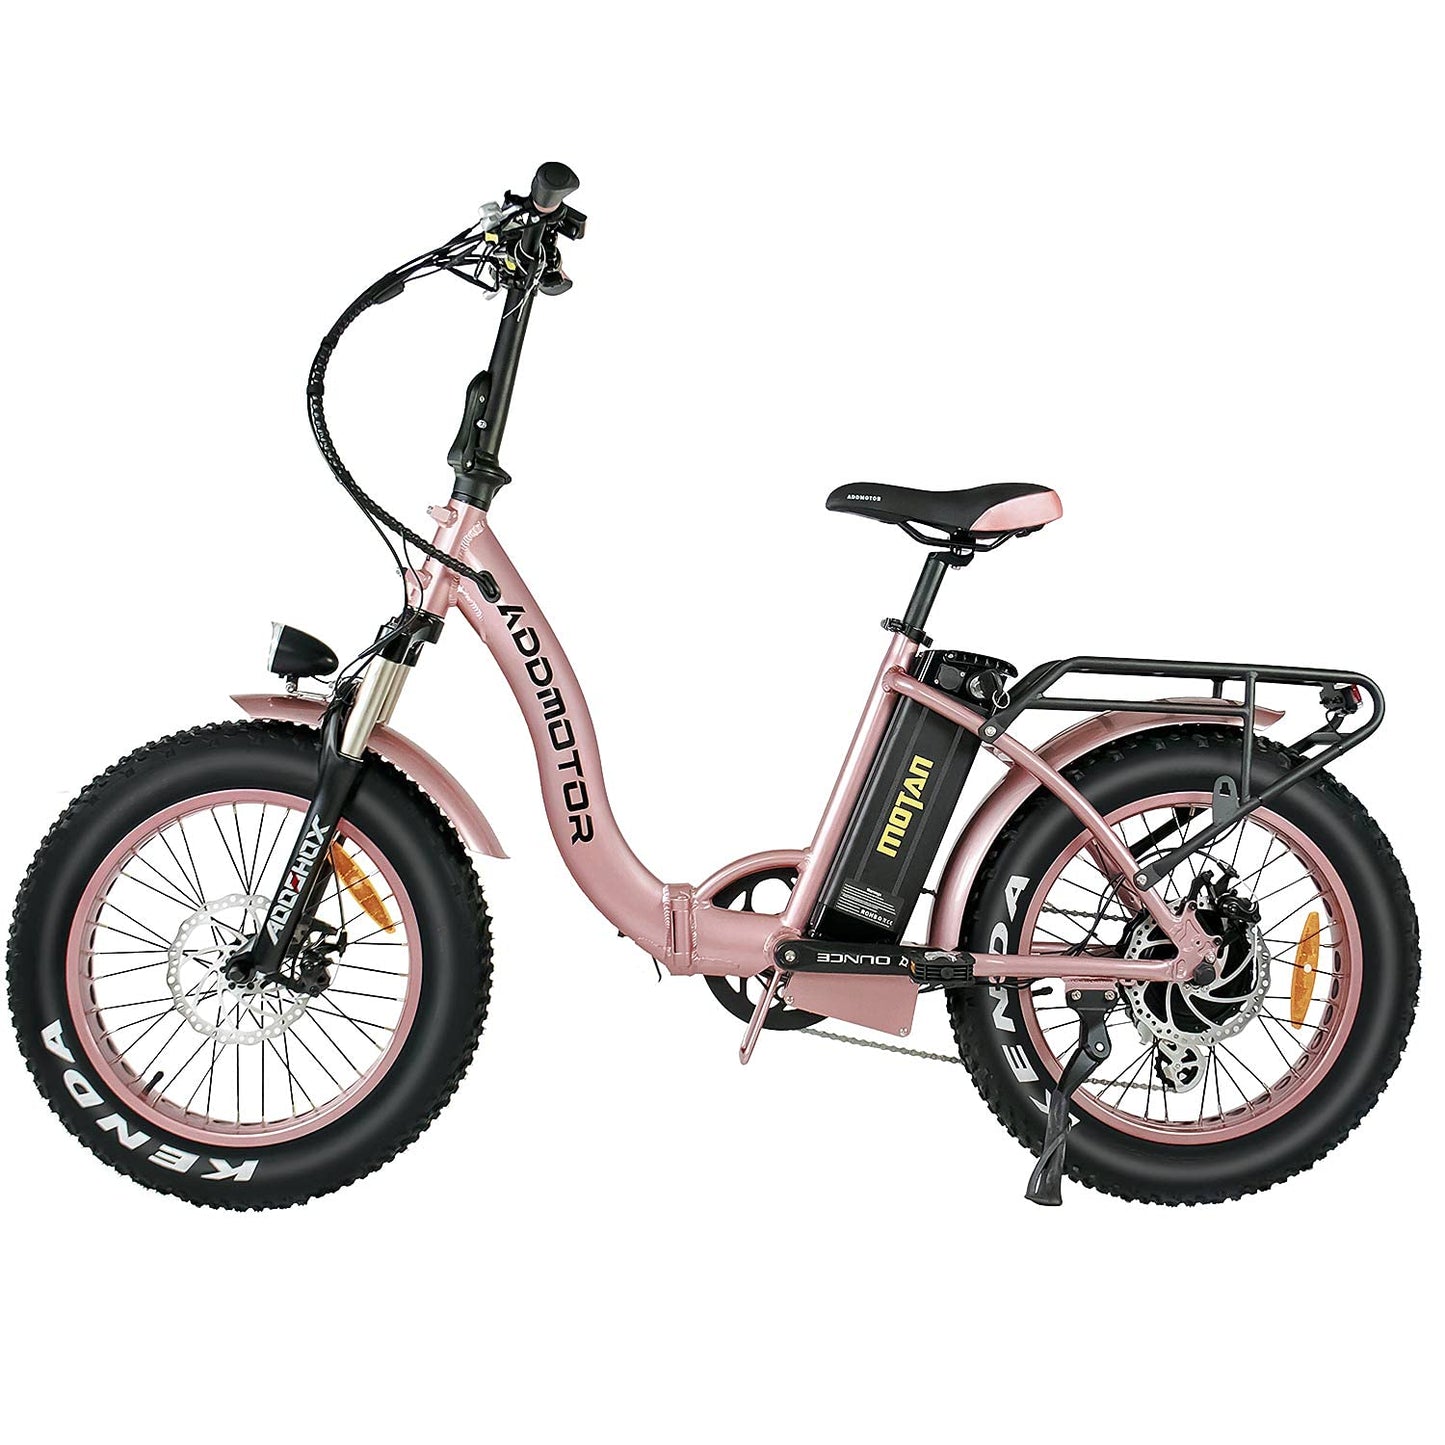 Rose Step-Thru Folding Electric Bicycle 20" Ebike, 750W 16Ah Removable Battery Urban Commuter Electric Bike, 7 Speed Gear Pedal Assist for | Decor Gifts and More